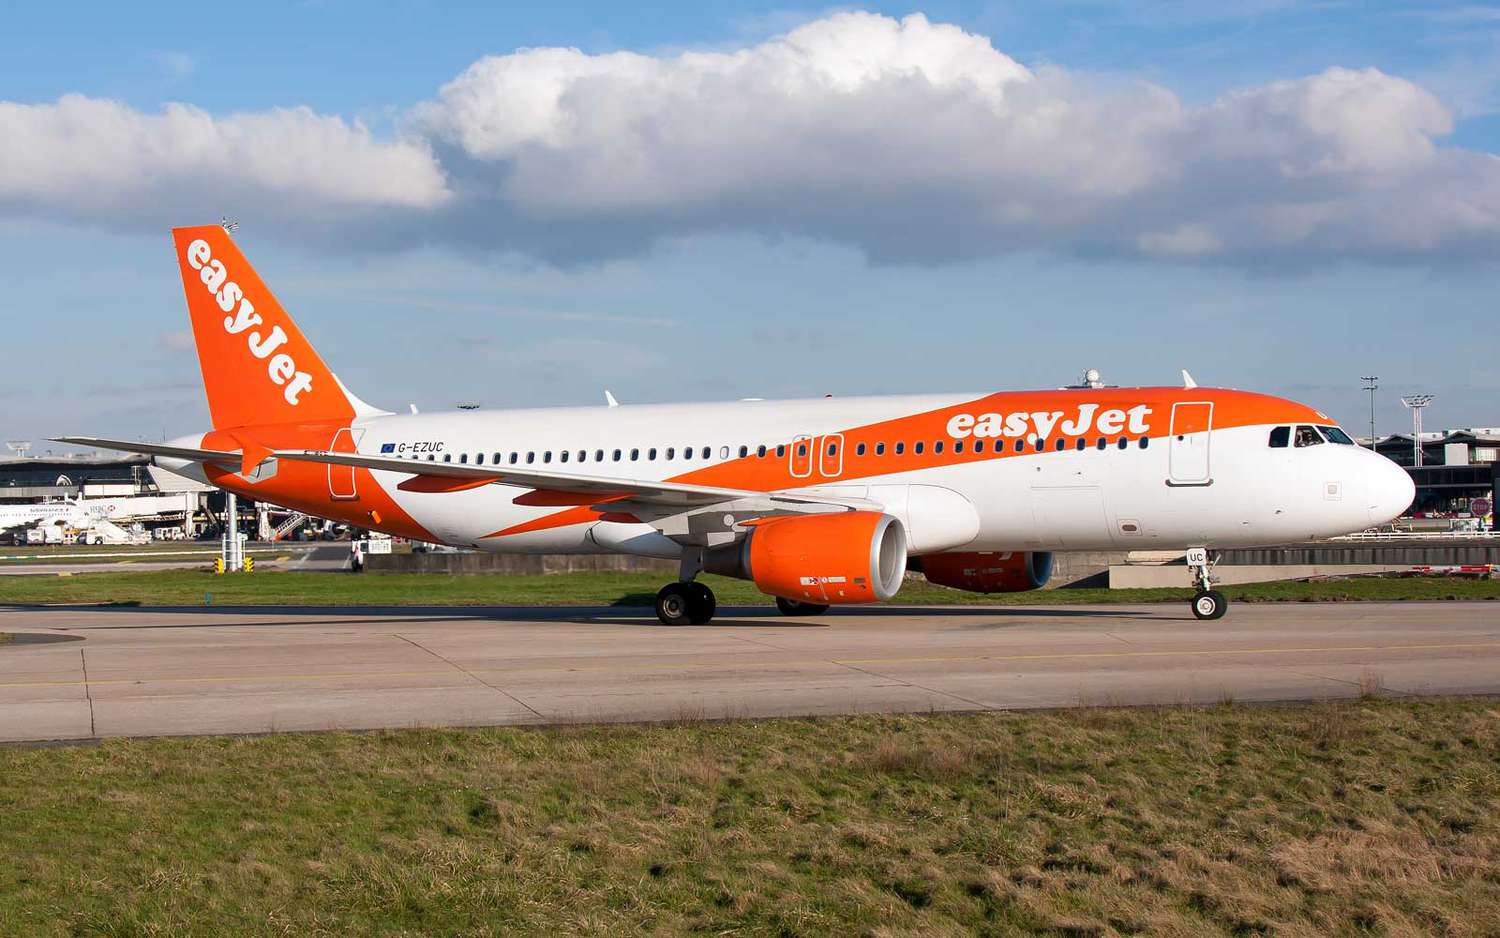 Flights from Southampton to Glasgow